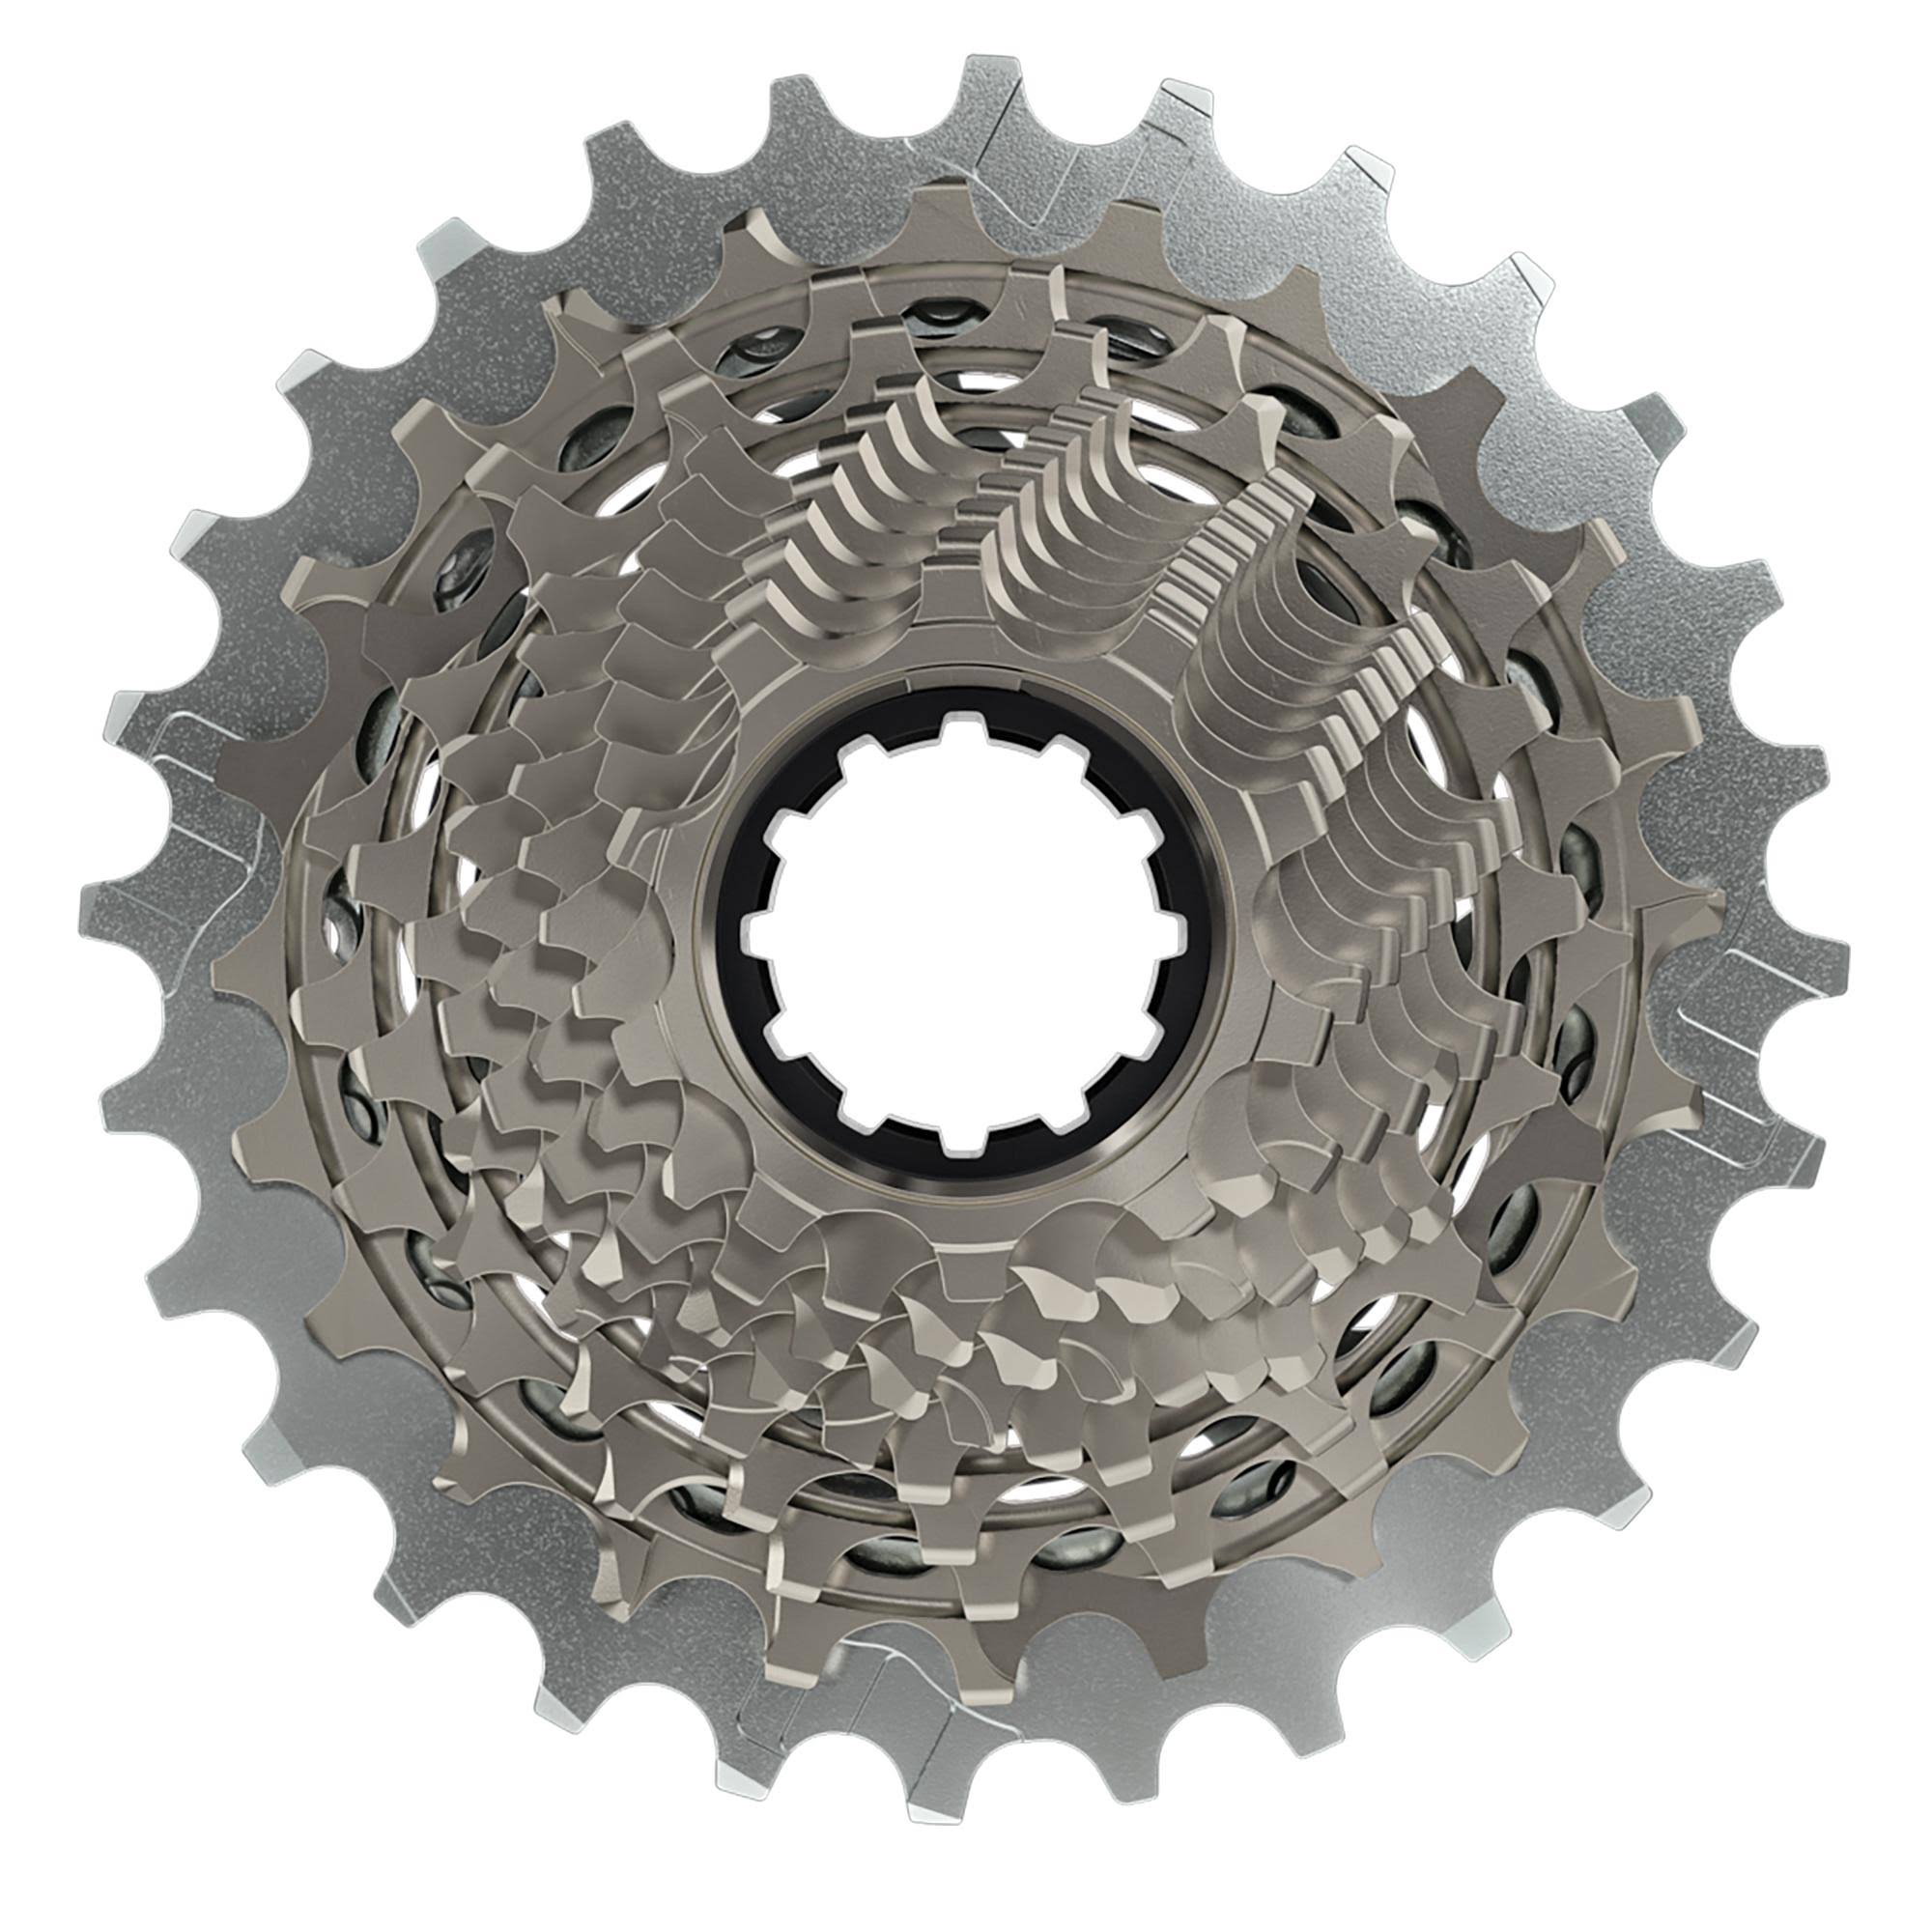 Sram Red AXS Xg-1290 Cassette - Silver, 12 Speed, 10t to 28t